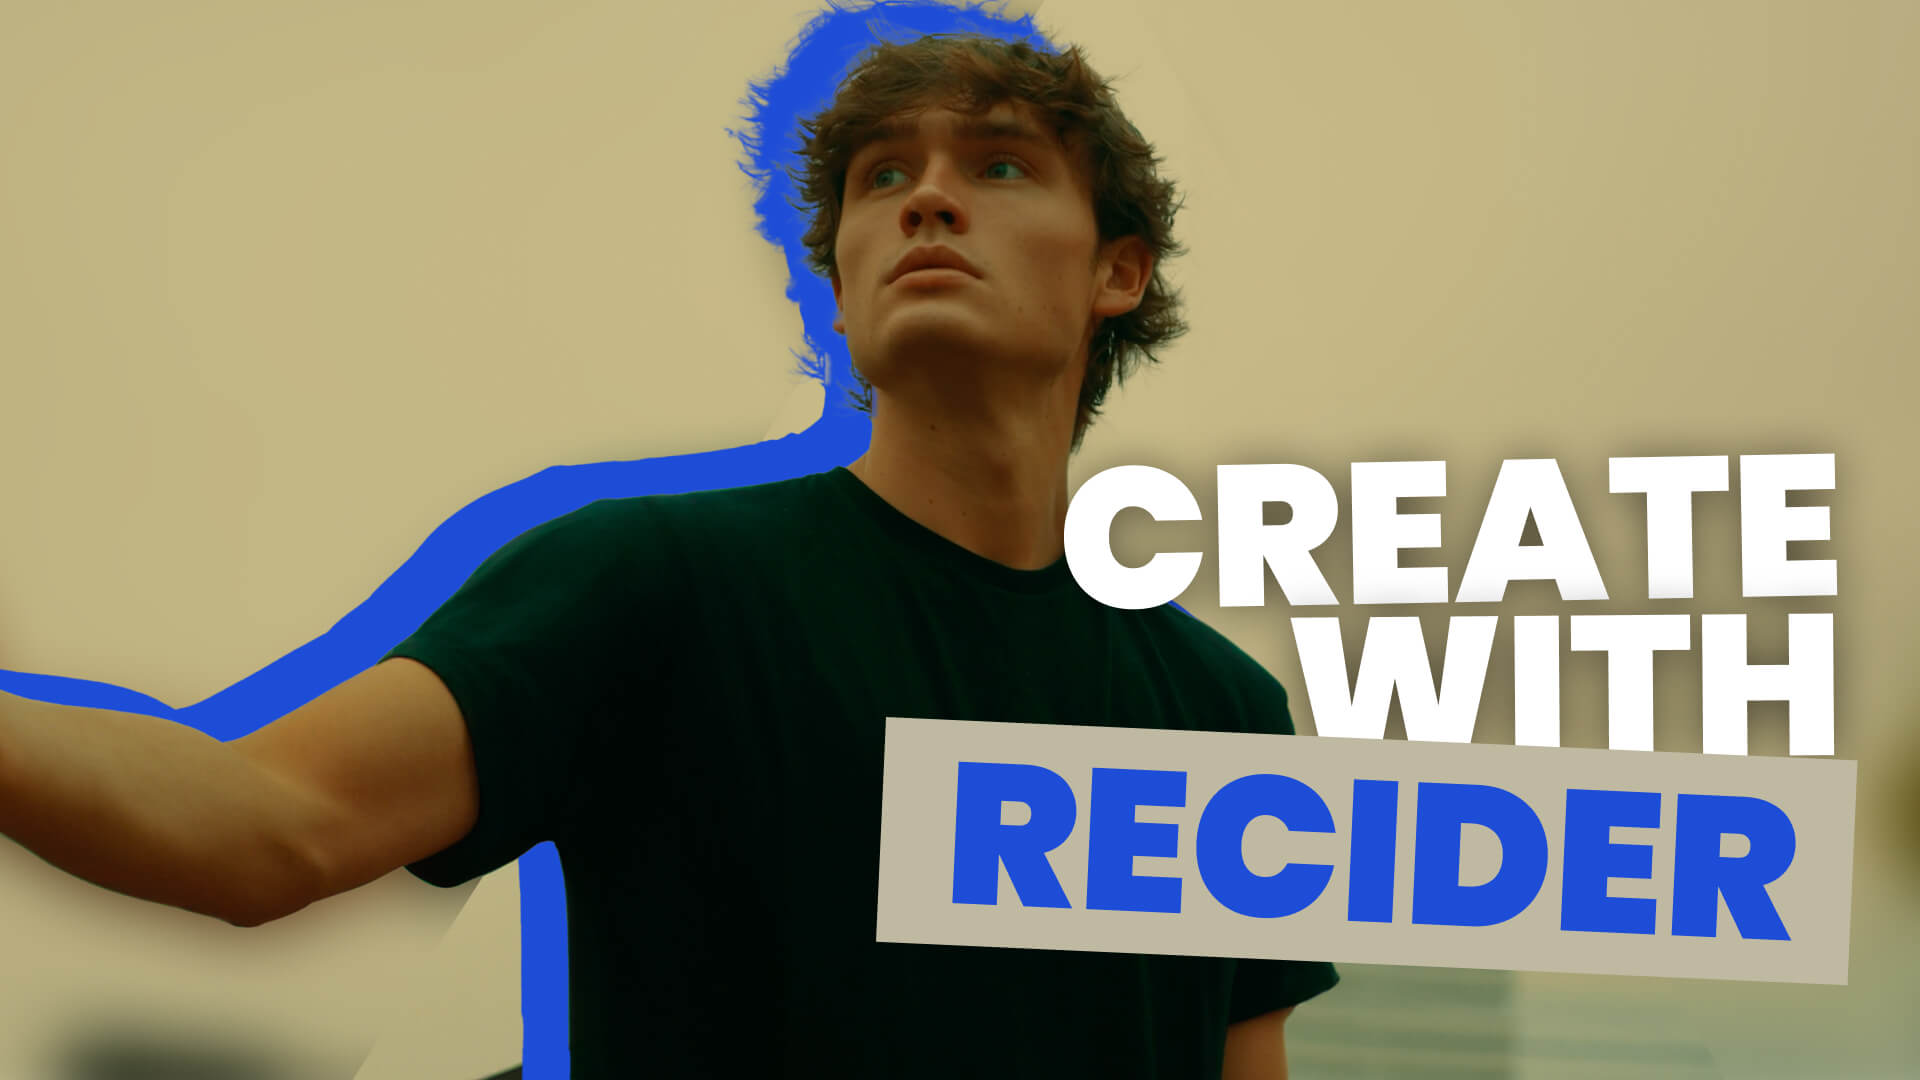 CREATE WITH RECIDER